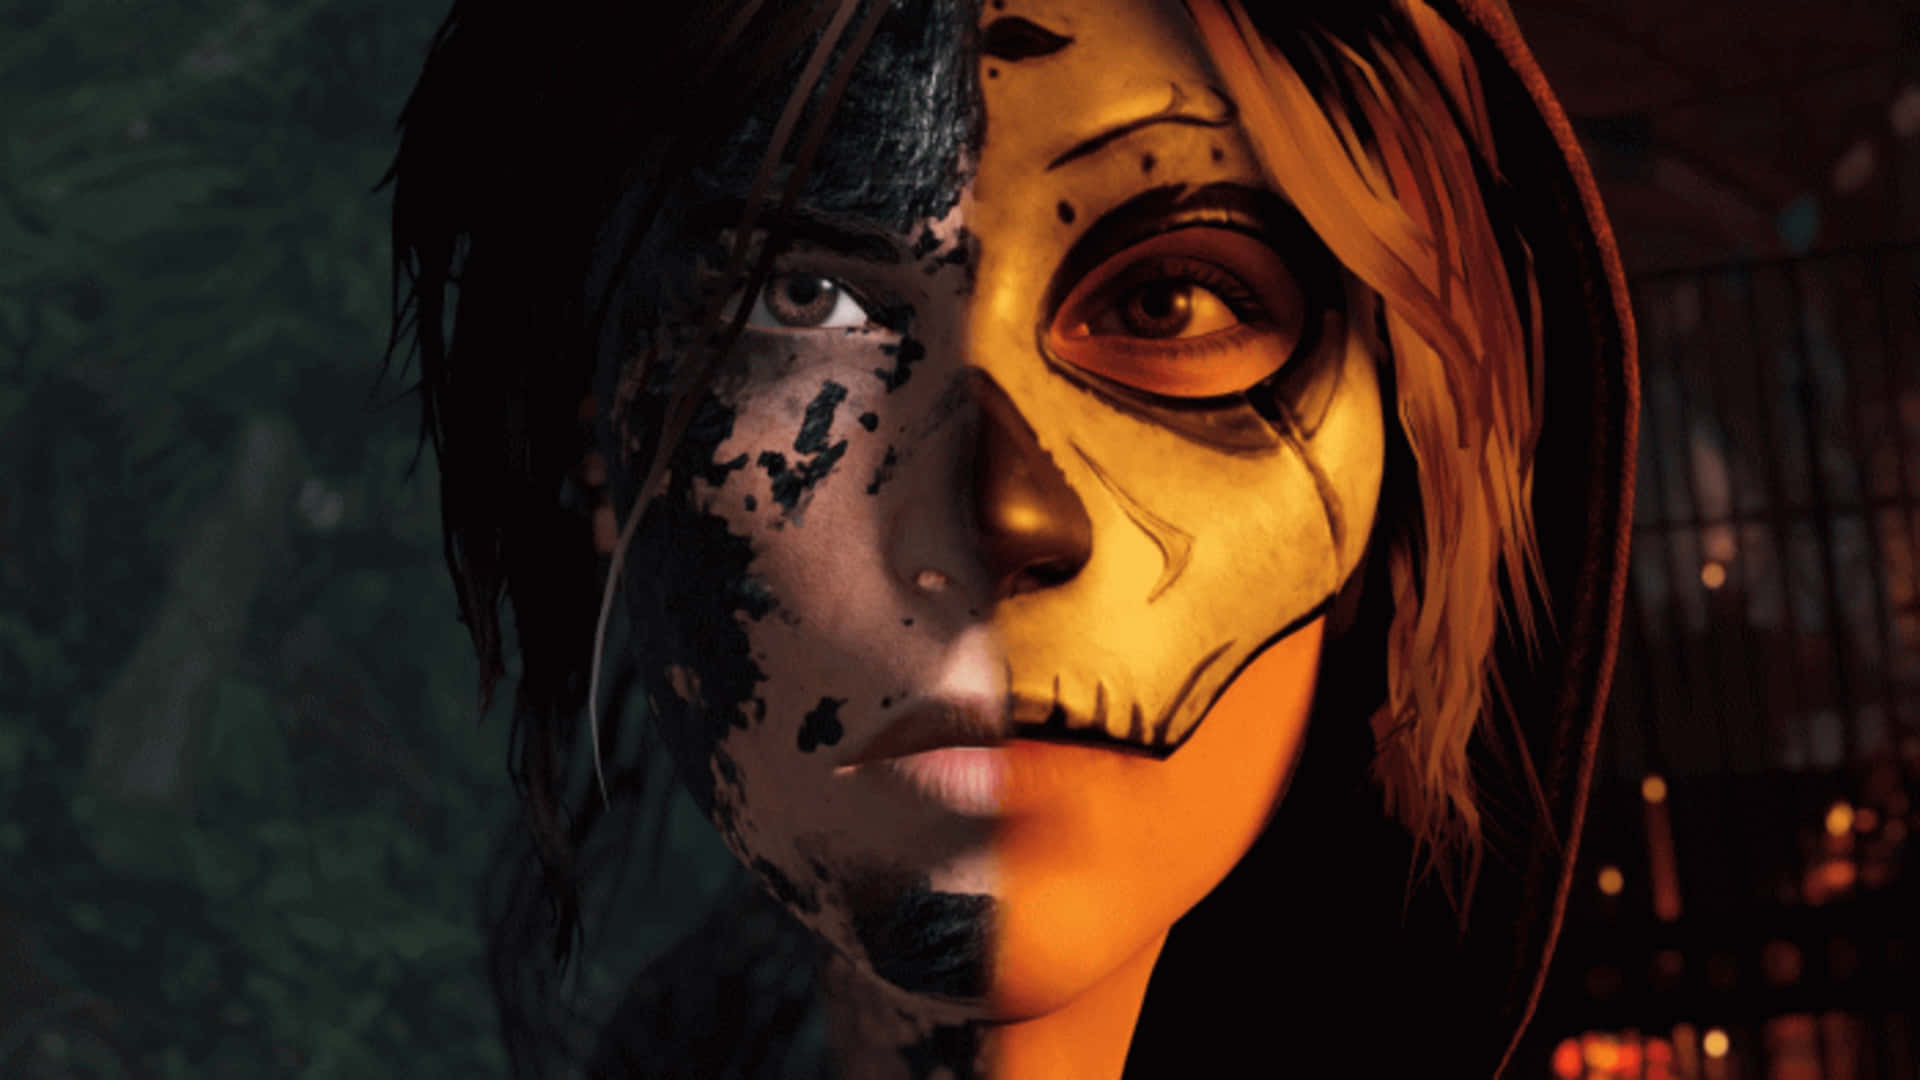 The Tomb Raider - A Woman With A Skull Face